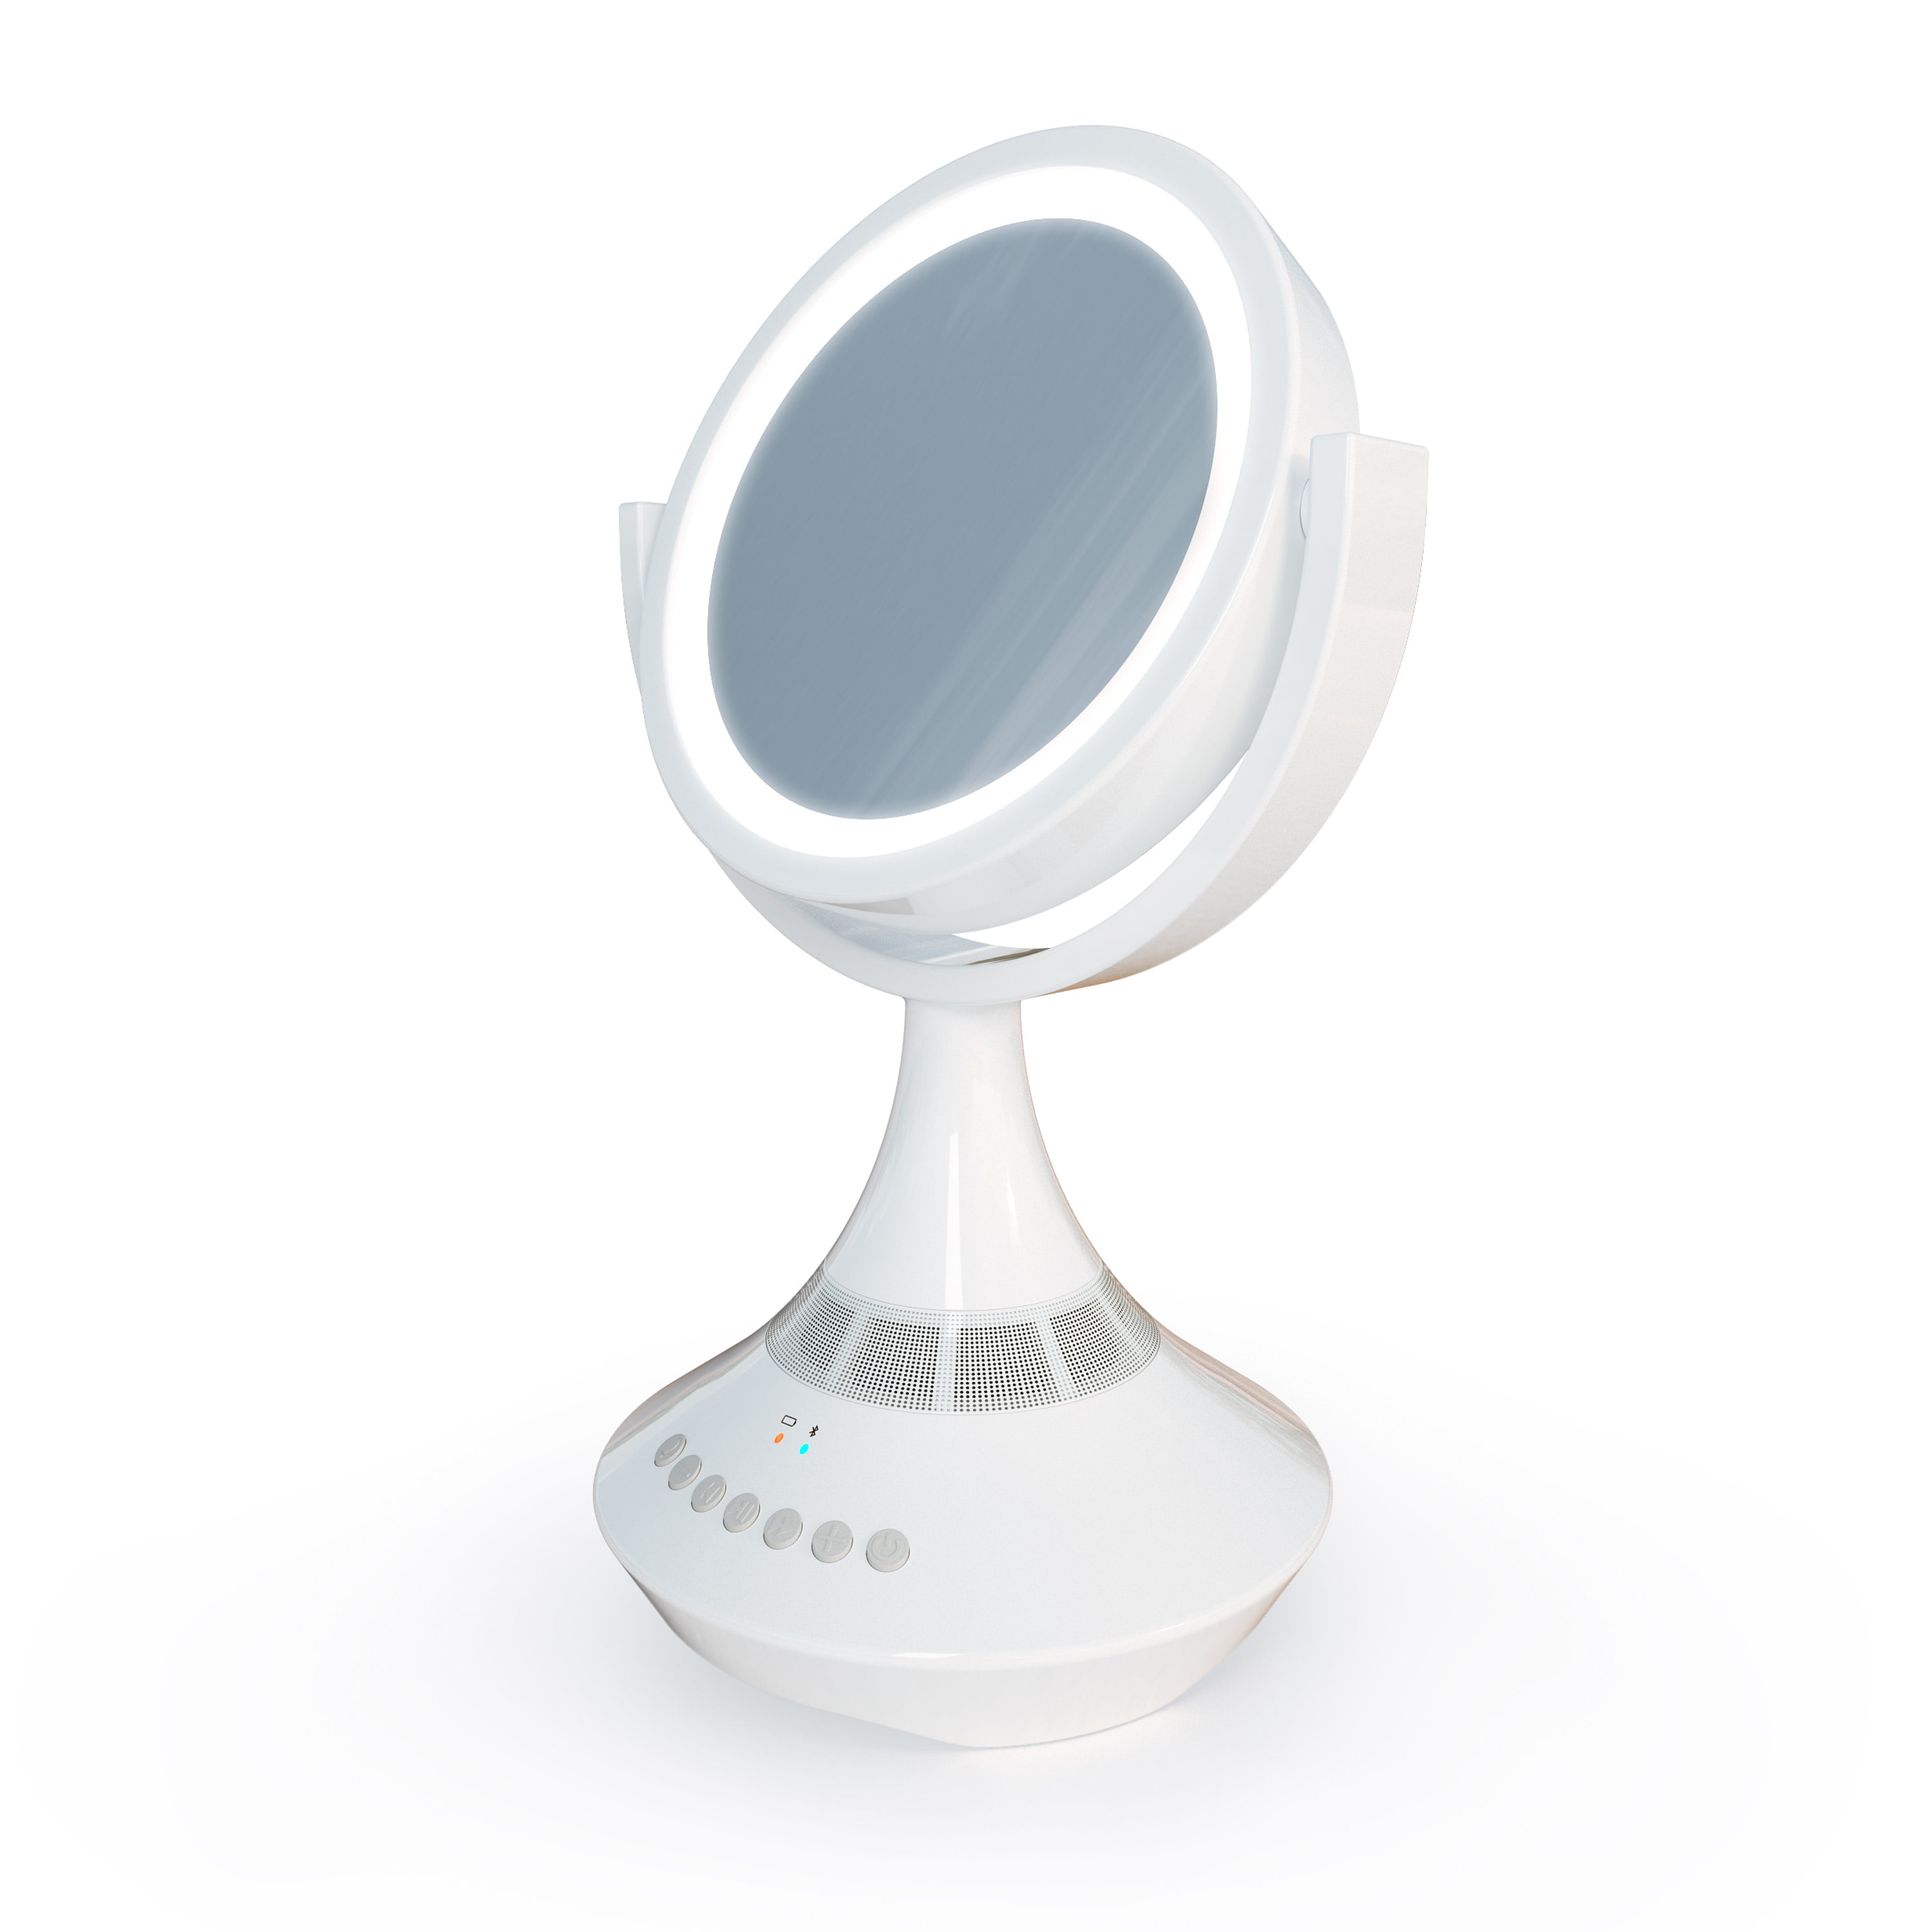 Atomi Bluetooth Double Sided Vanity, Small Cream Vanity Mirror With Lights And Bluetooth Speaker